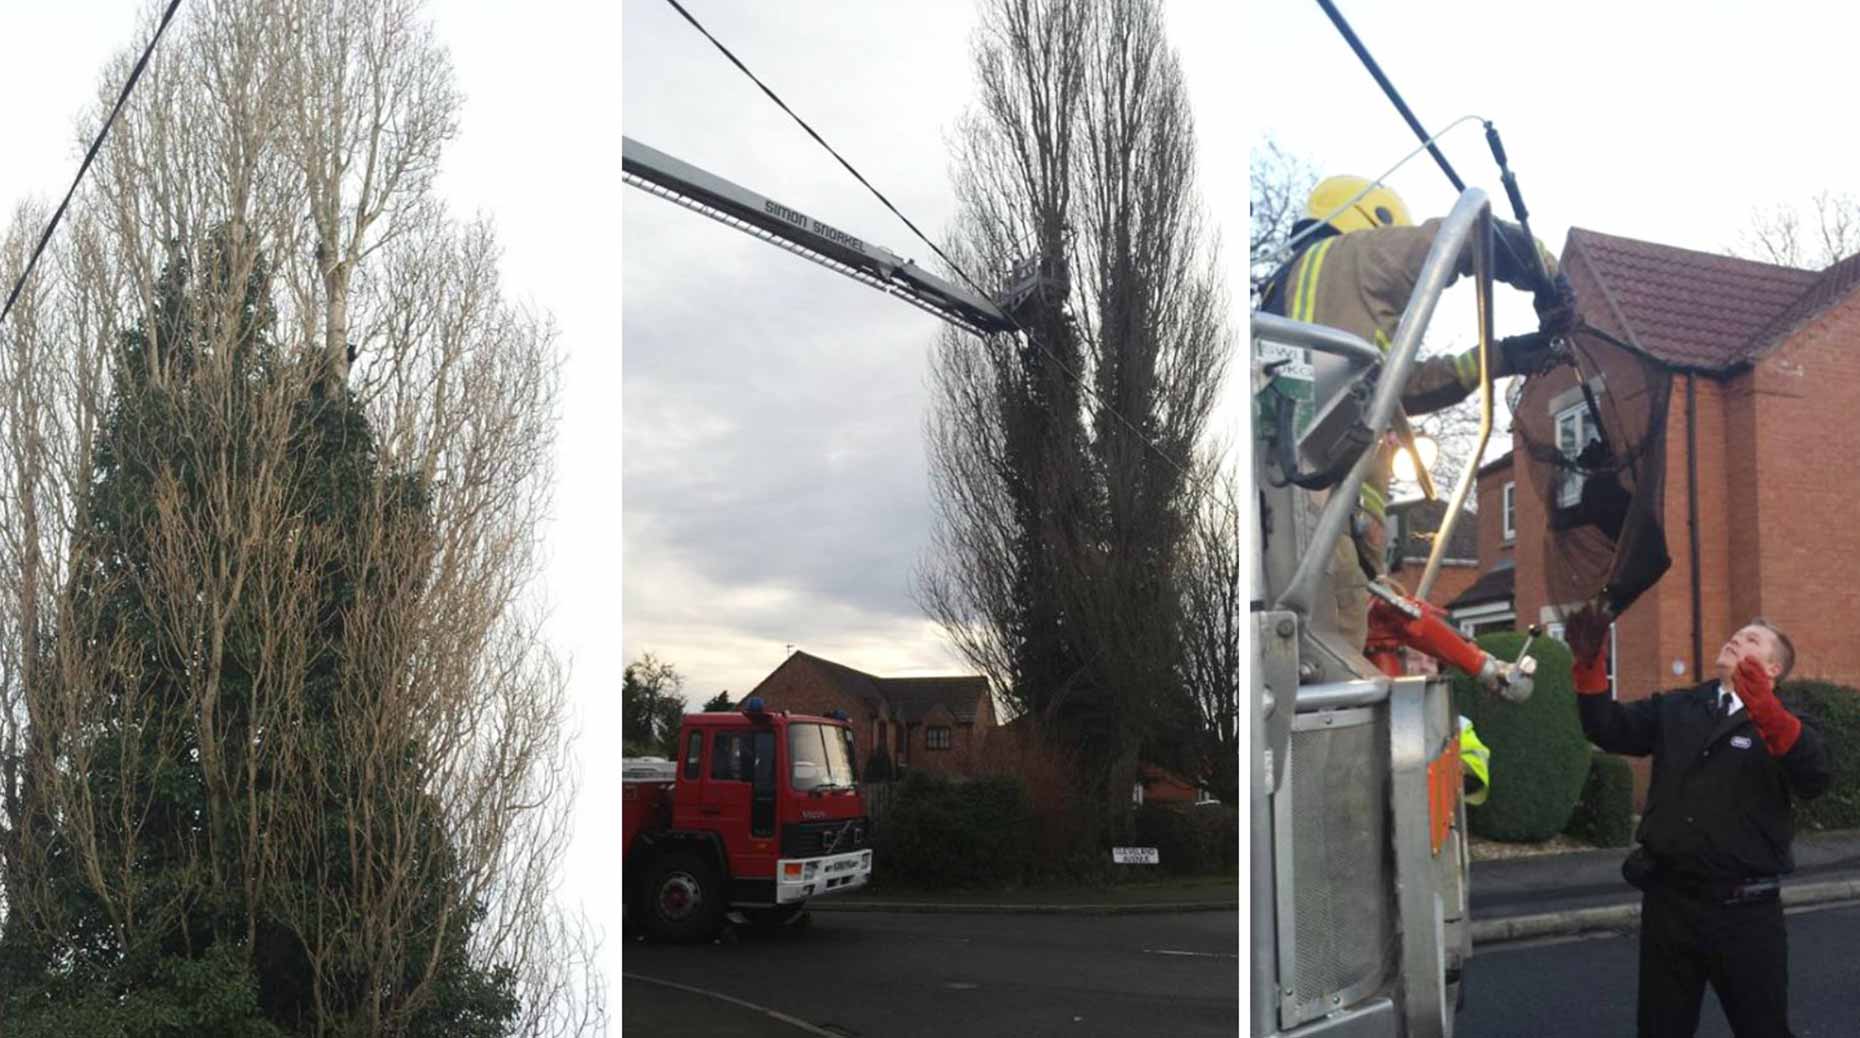 Firefighters rescue cat from tree in Lincoln